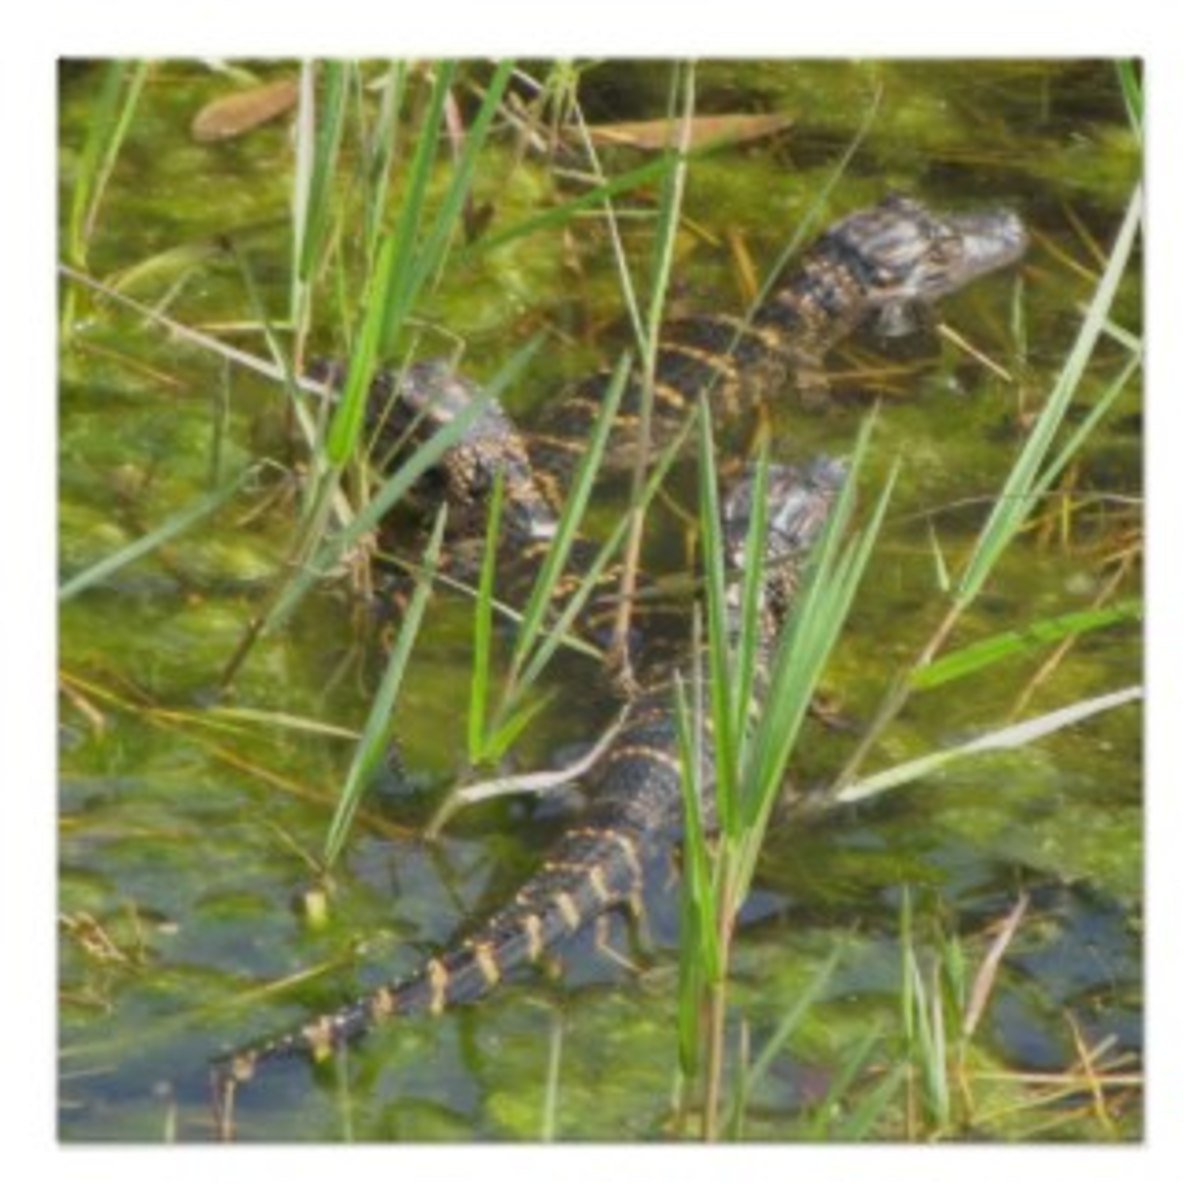 I created this Three Baby Alligators Poster on Zazzle and it is available there. 